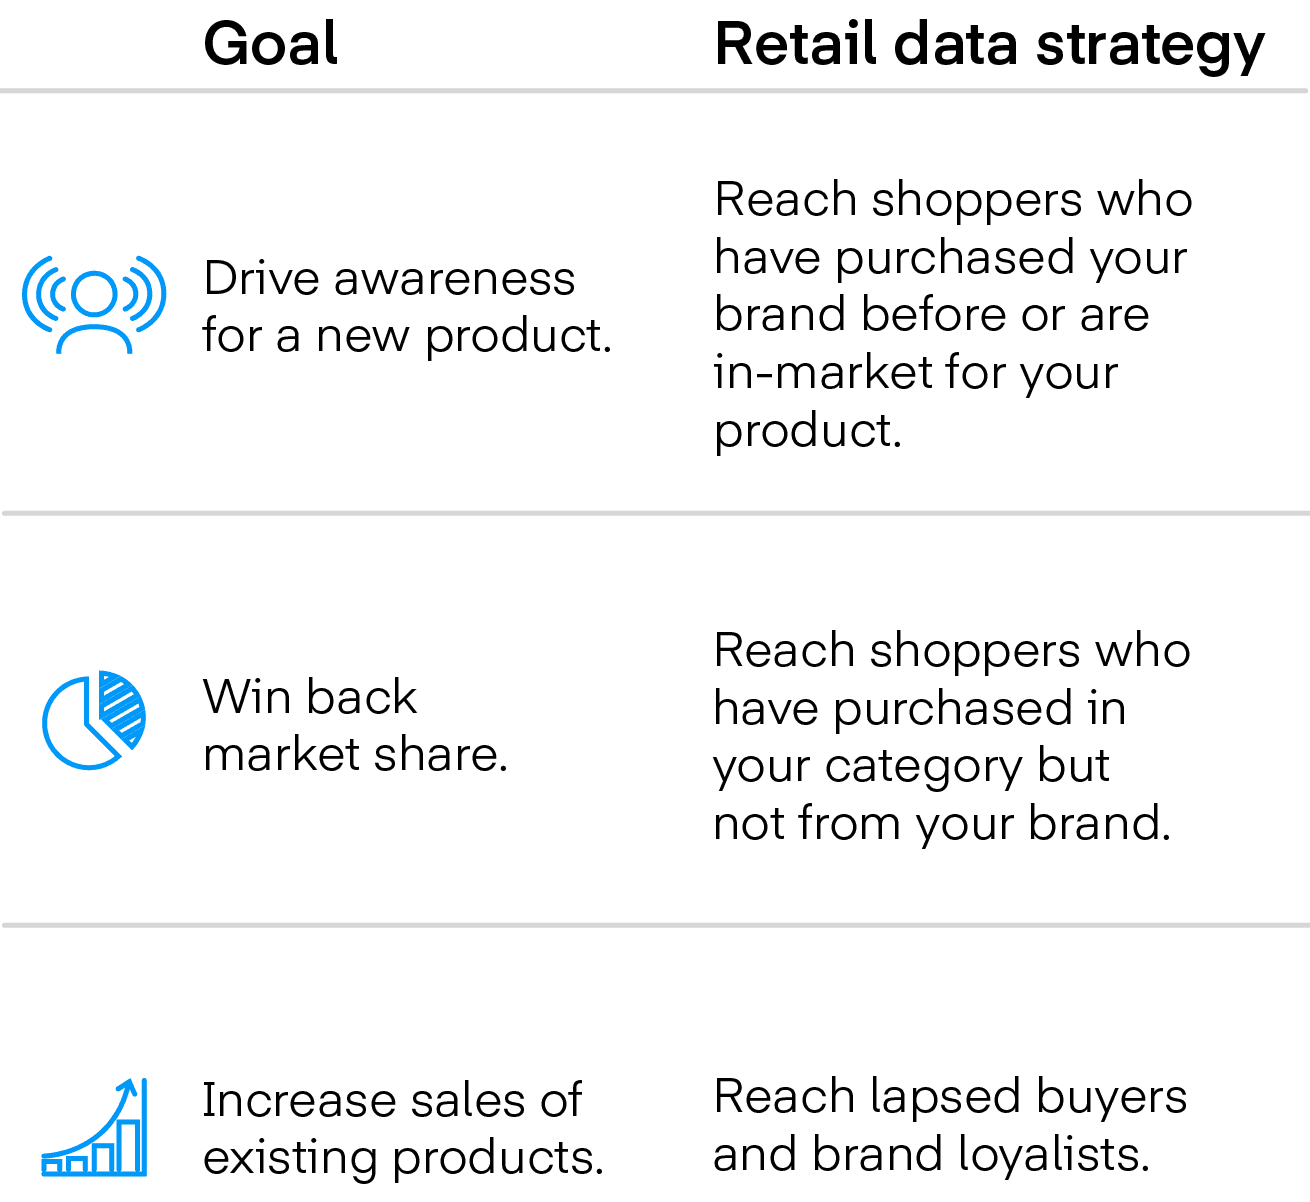 Chart shows examples of how to use retail data strategies